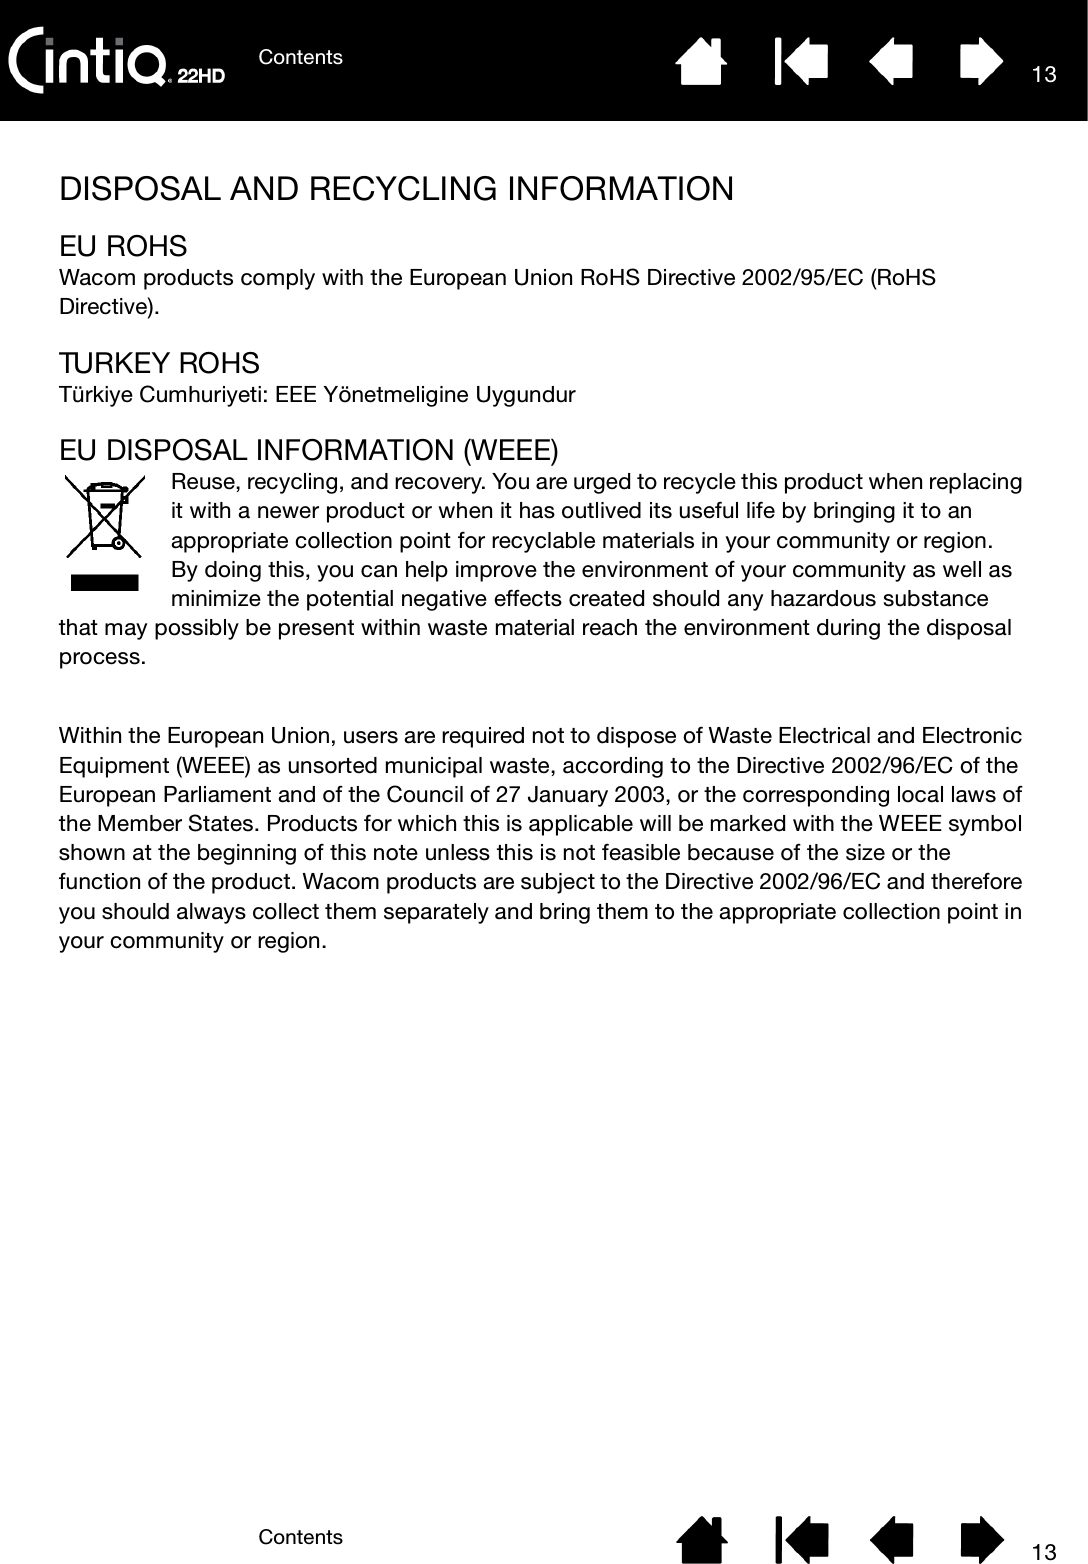 ContentsContents 1313DISPOSAL AND RECYCLING INFORMATIONEU ROHSWacom products comply with the European Union RoHS Directive 2002/95/EC (RoHS Directive).TURKEY RO HSTürkiye Cumhuriyeti: EEE Yönetmeligine UygundurEU DISPOSAL INFORMATION (WEEE)Reuse, recycling, and recovery. You are urged to recycle this product when replacing it with a newer product or when it has outlived its useful life by bringing it to an appropriate collection point for recyclable materials in your community or region.By doing this, you can help improve the environment of your community as well as minimize the potential negative effects created should any hazardous substance that may possibly be present within waste material reach the environment during the disposal process.Within the European Union, users are required not to dispose of Waste Electrical and Electronic Equipment (WEEE) as unsorted municipal waste, according to the Directive 2002/96/EC of the European Parliament and of the Council of 27 January 2003, or the corresponding local laws of the Member States. Products for which this is applicable will be marked with the WEEE symbol shown at the beginning of this note unless this is not feasible because of the size or the function of the product. Wacom products are subject to the Directive 2002/96/EC and therefore you should always collect them separately and bring them to the appropriate collection point in your community or region.